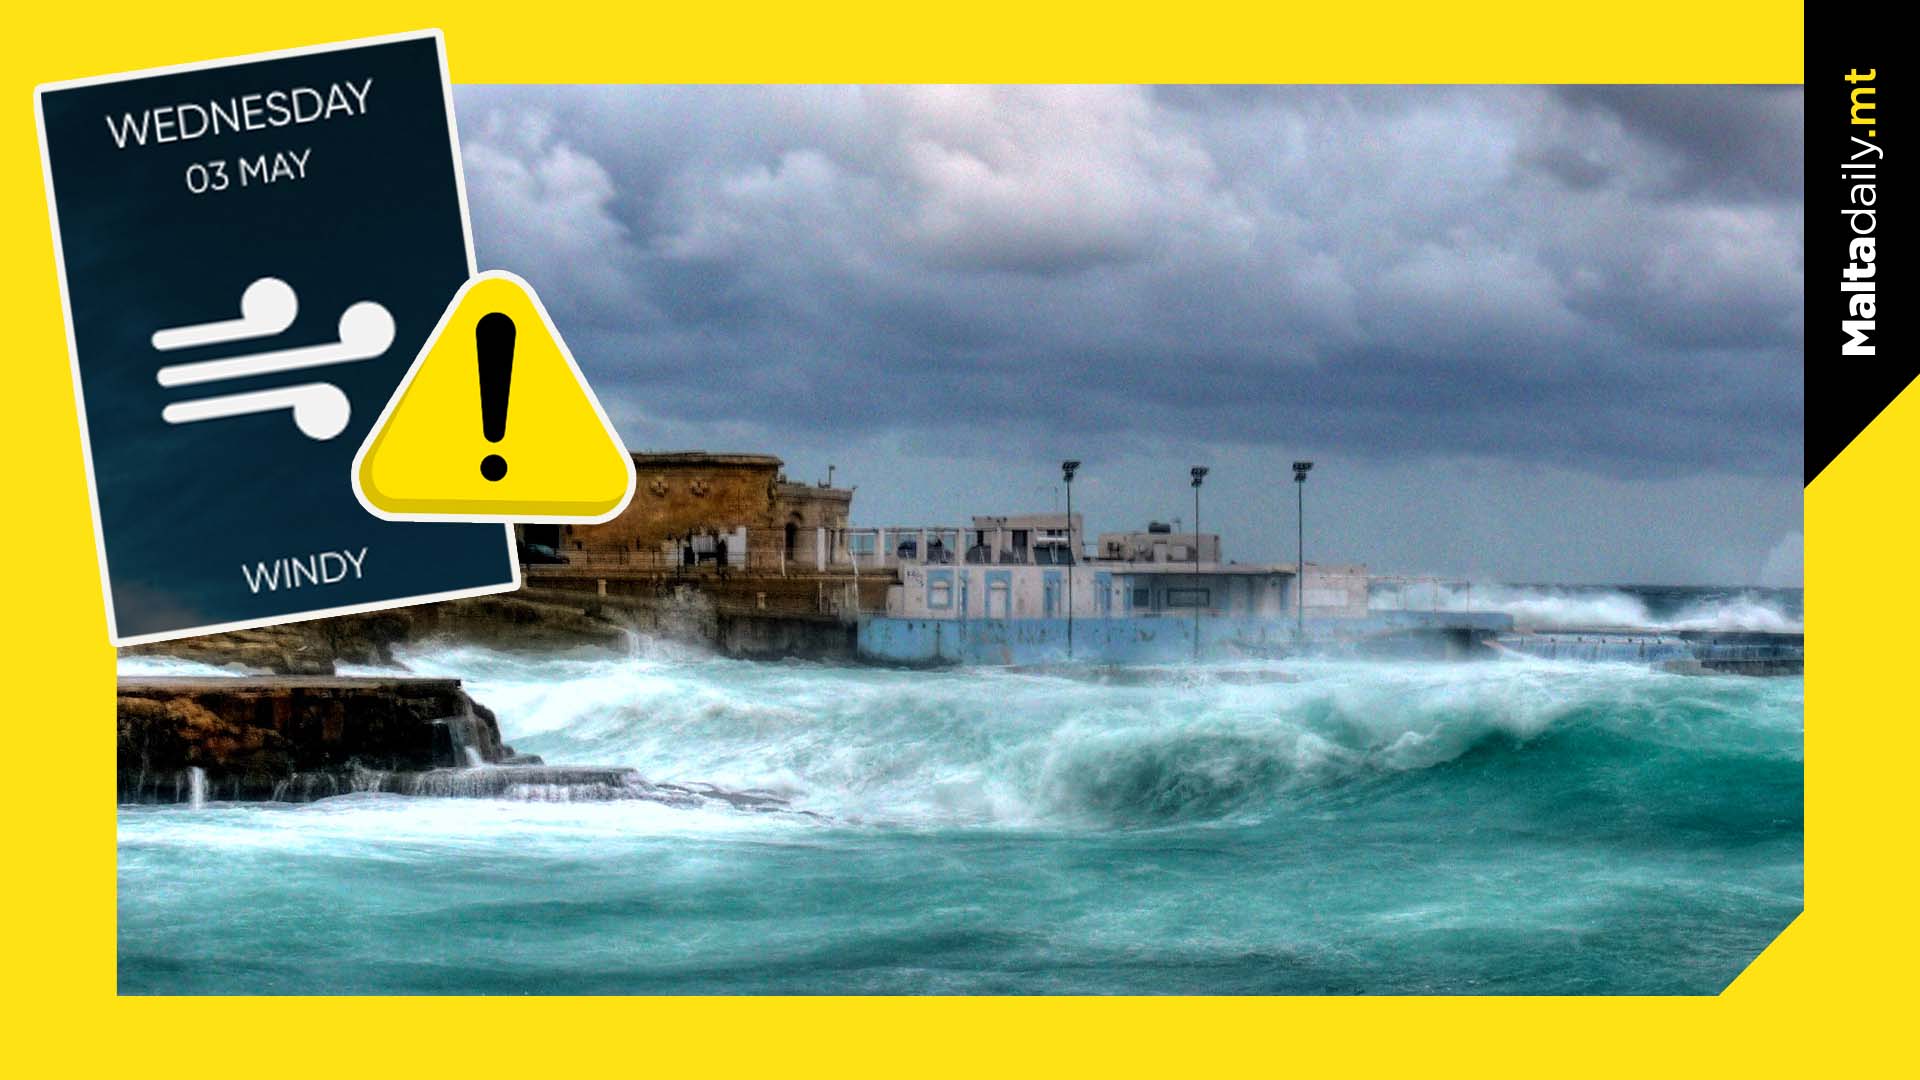 Strong wind warning issued by Malta MET Office